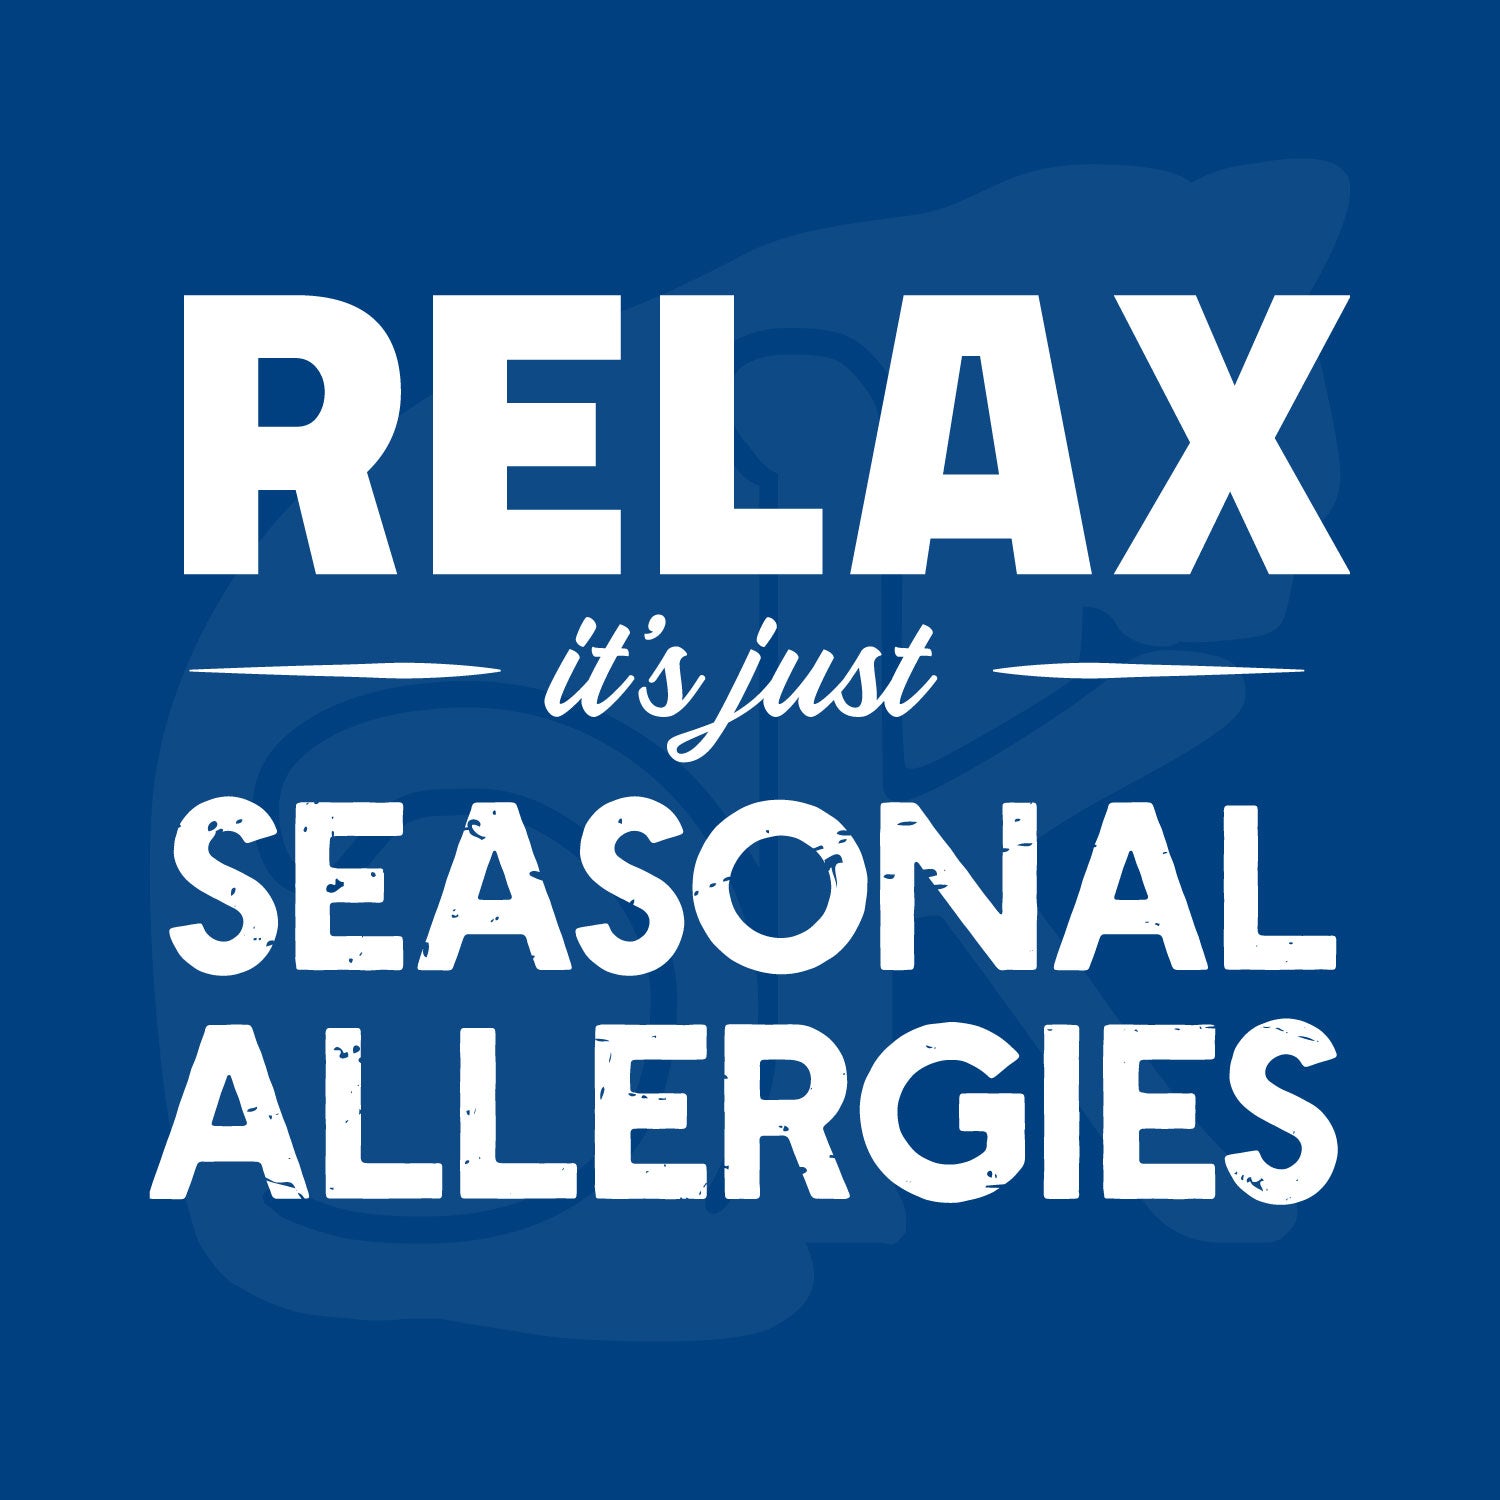 Standalone watermarked graphic: "RELAX it's just SEASONAL ALLERGIES"